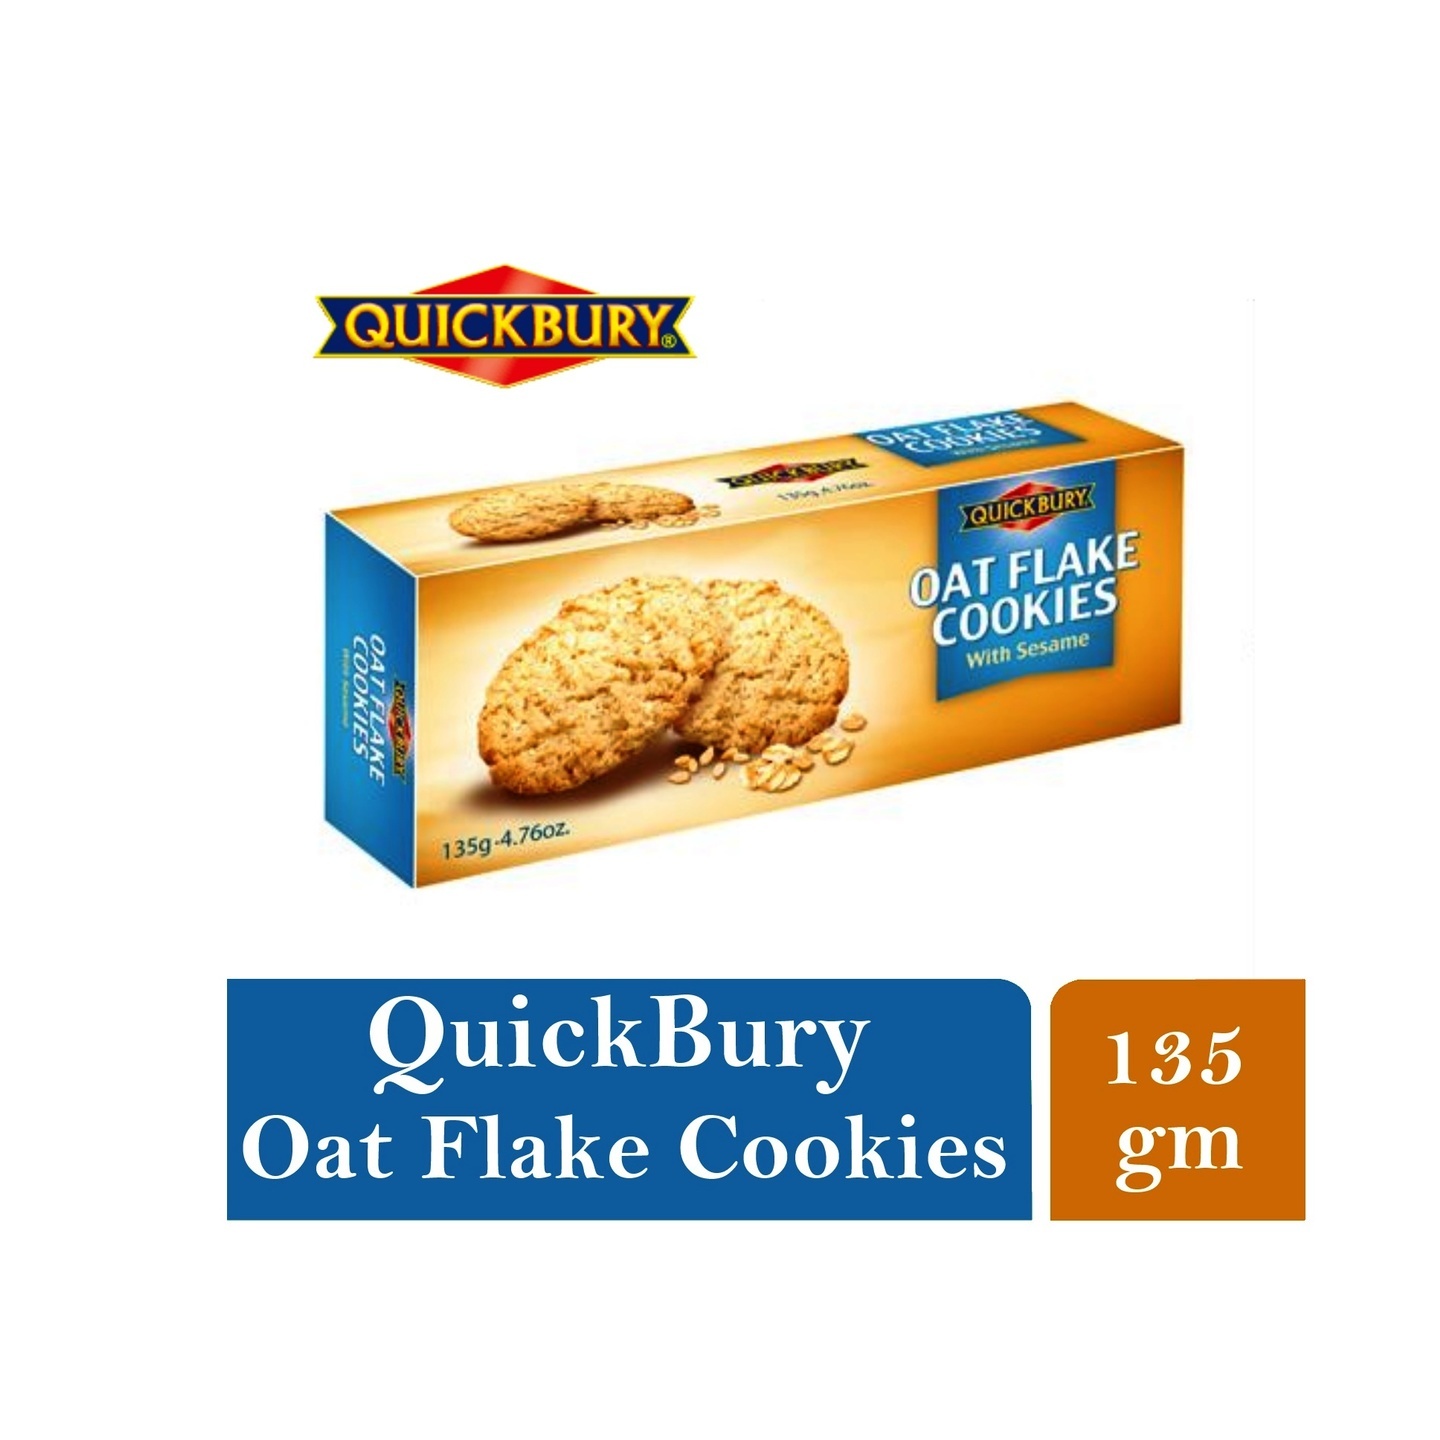 Quickbury Sugar Free Oat Flake Cookies with Sesame 135g